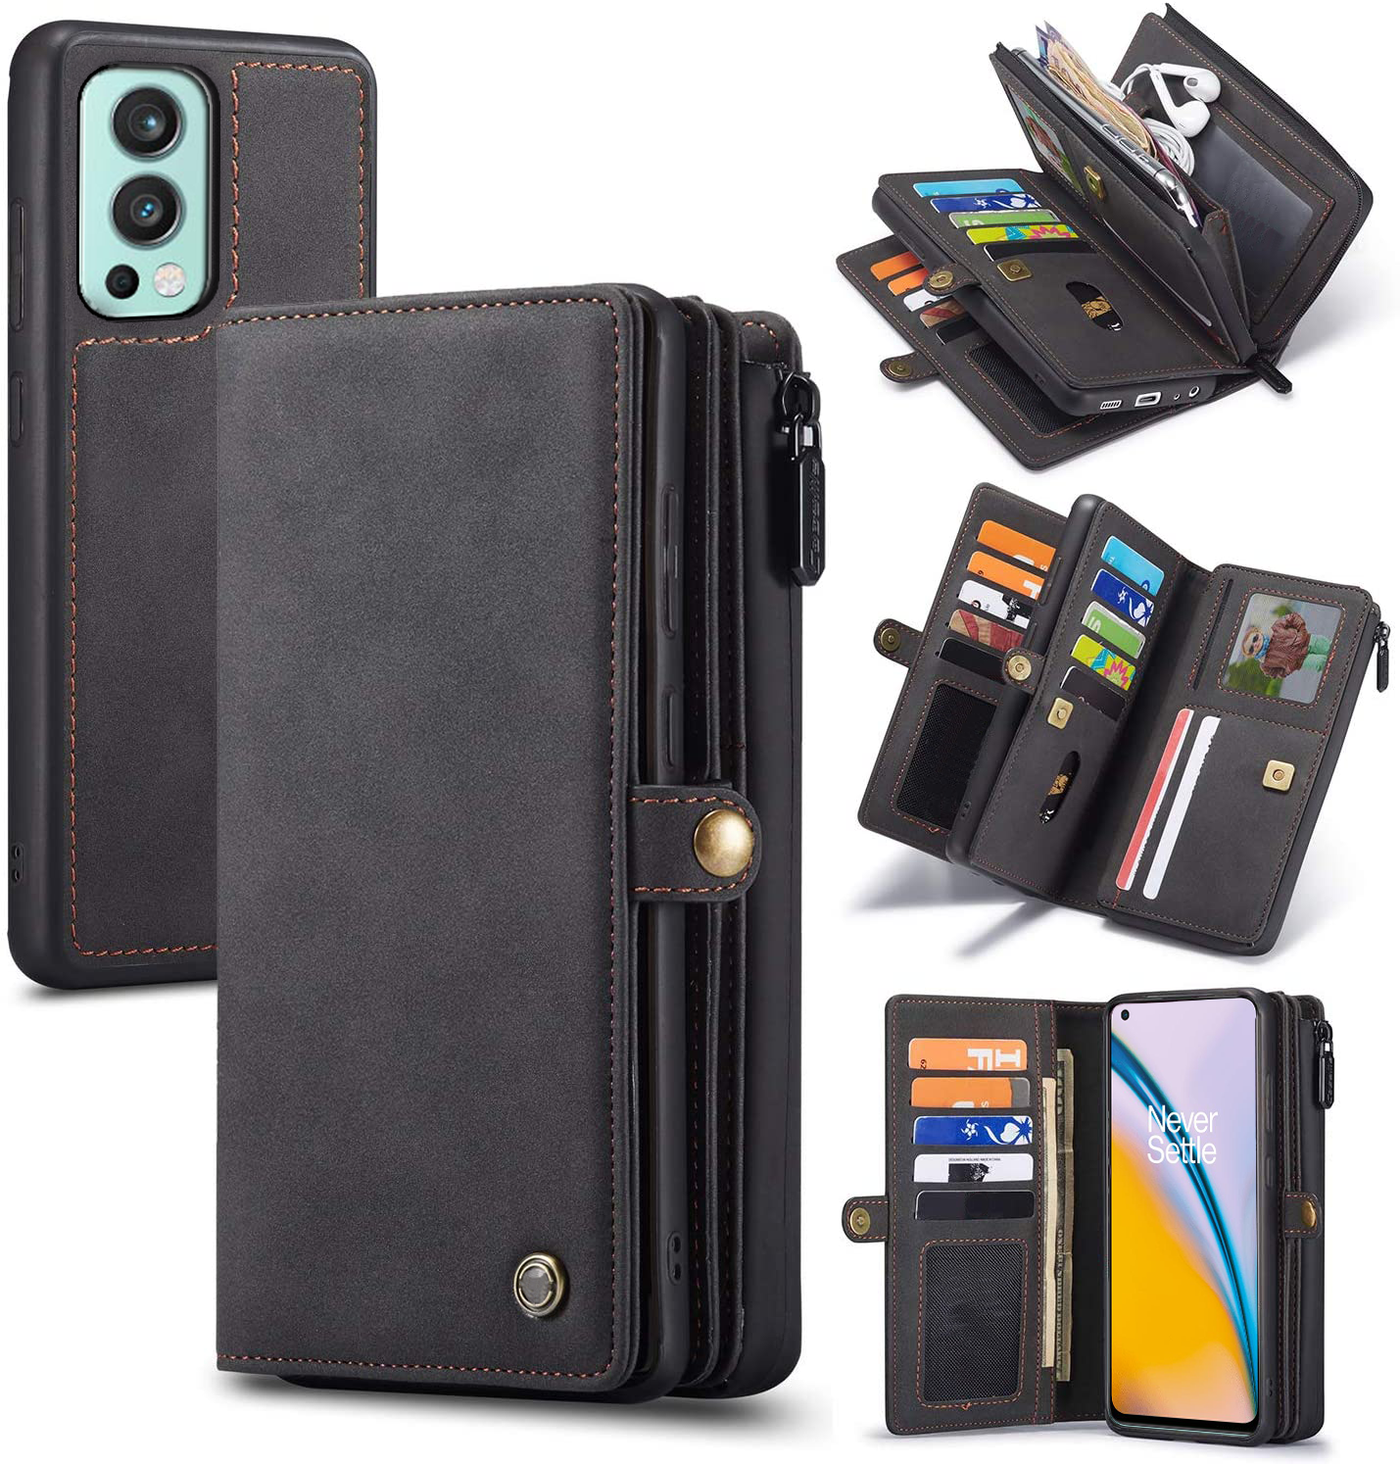 Excelsior Premium Multifunctional Leather Wallet Flip Cover Case For Oneplus Nord 2